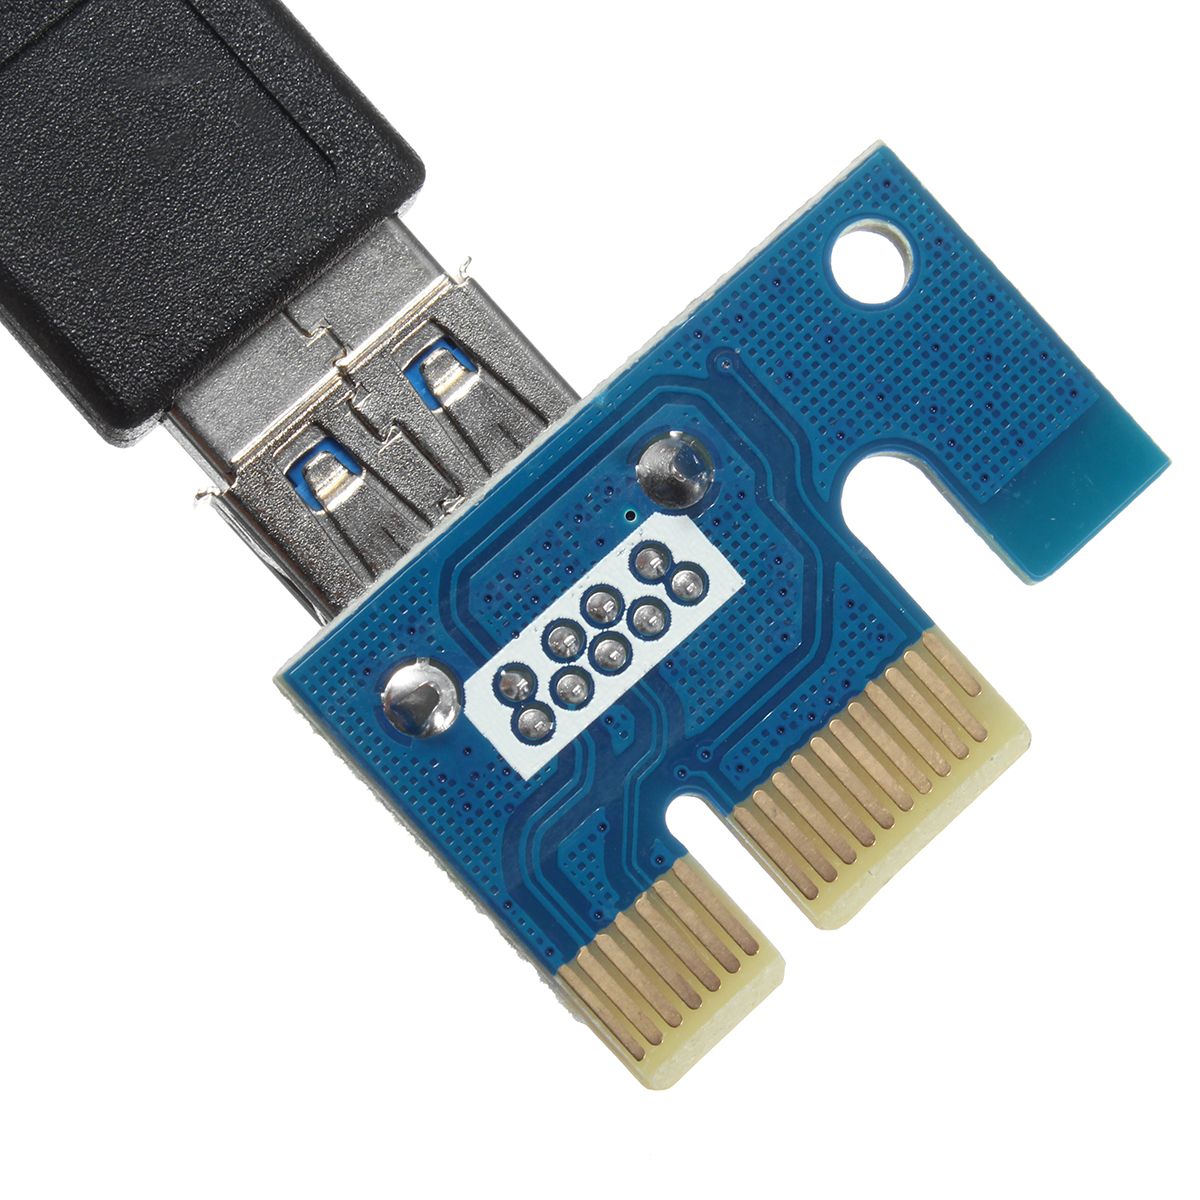 PCI-E-Express-USB30-1x-to16x-Extender-Riser-Card-Adapter-SATA-Power-Cable-1634031